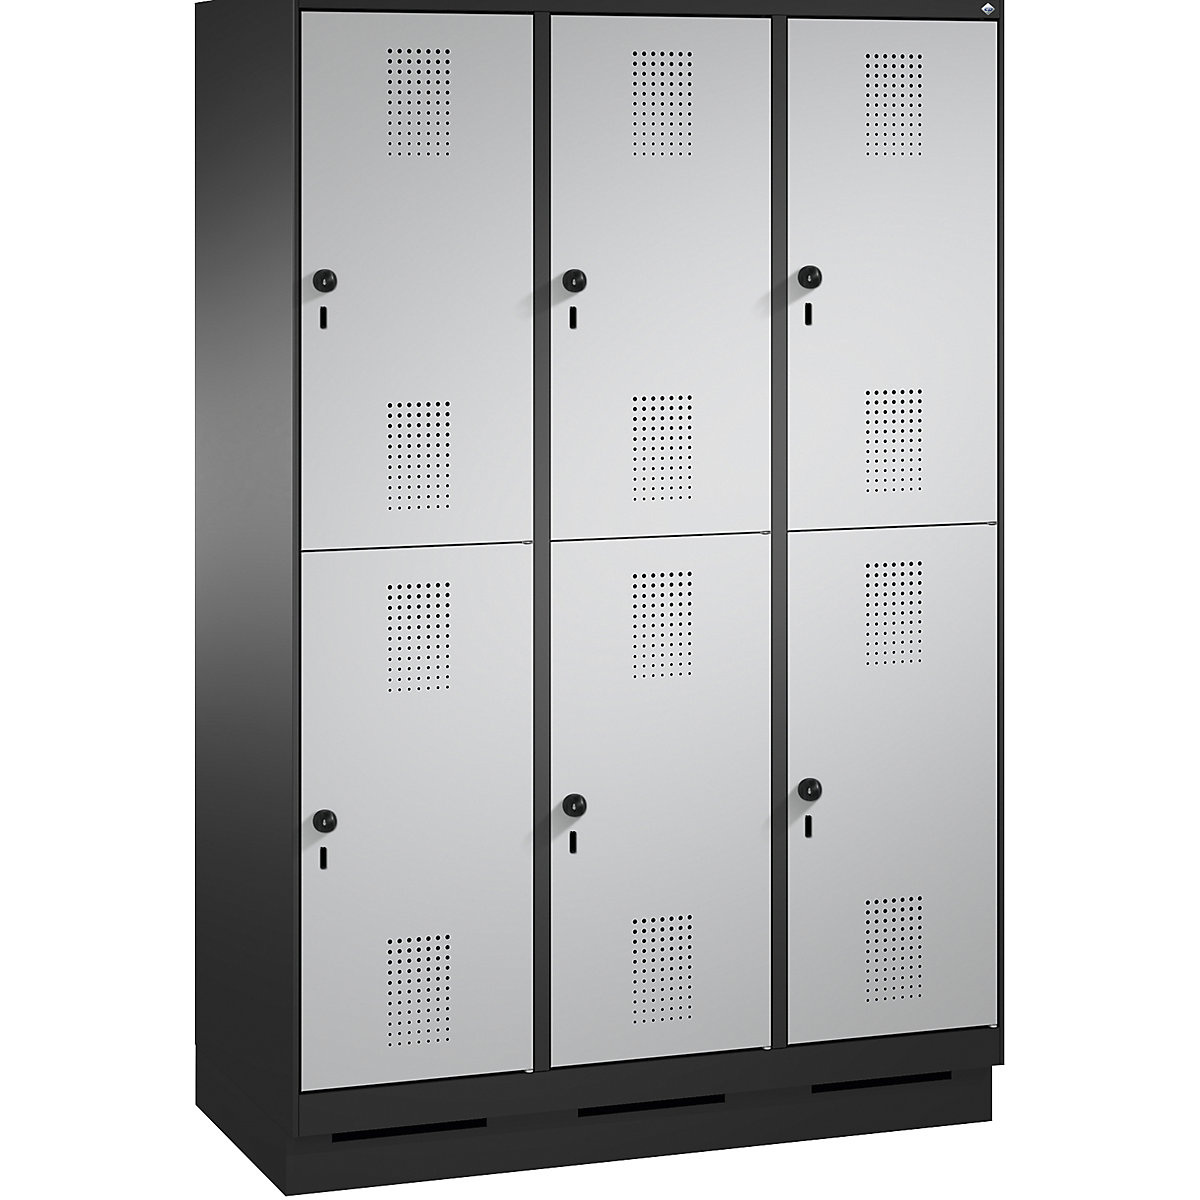 EVOLO cloakroom locker, double tier, with plinth – C+P, 3 compartments, 2 shelf compartments each, compartment width 400 mm, black grey / white aluminium-6